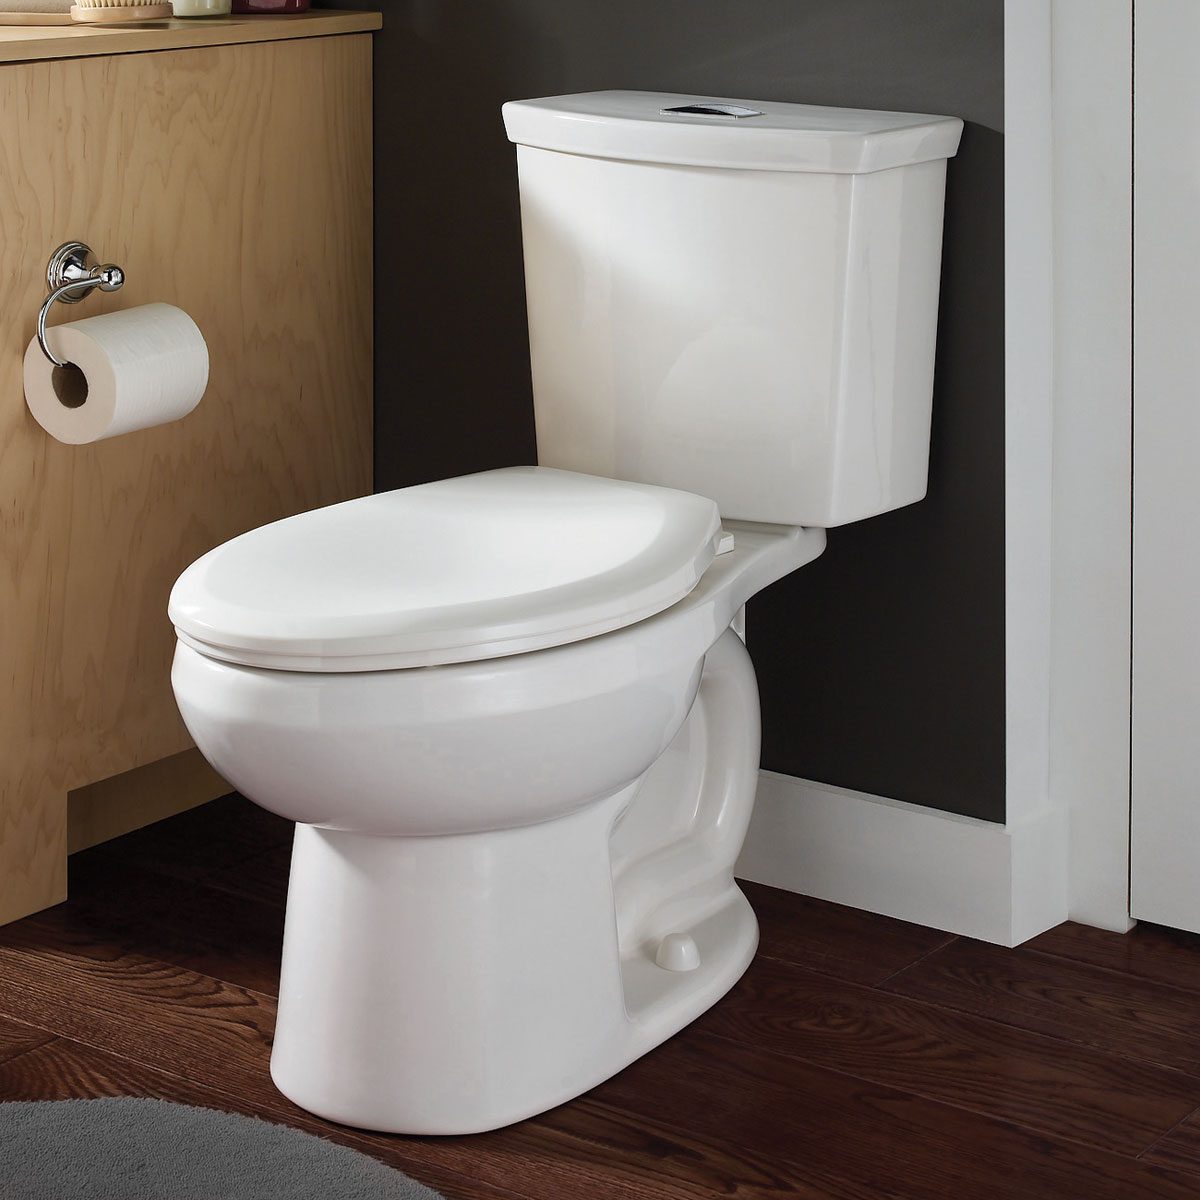 Tips for Buying a Toilet